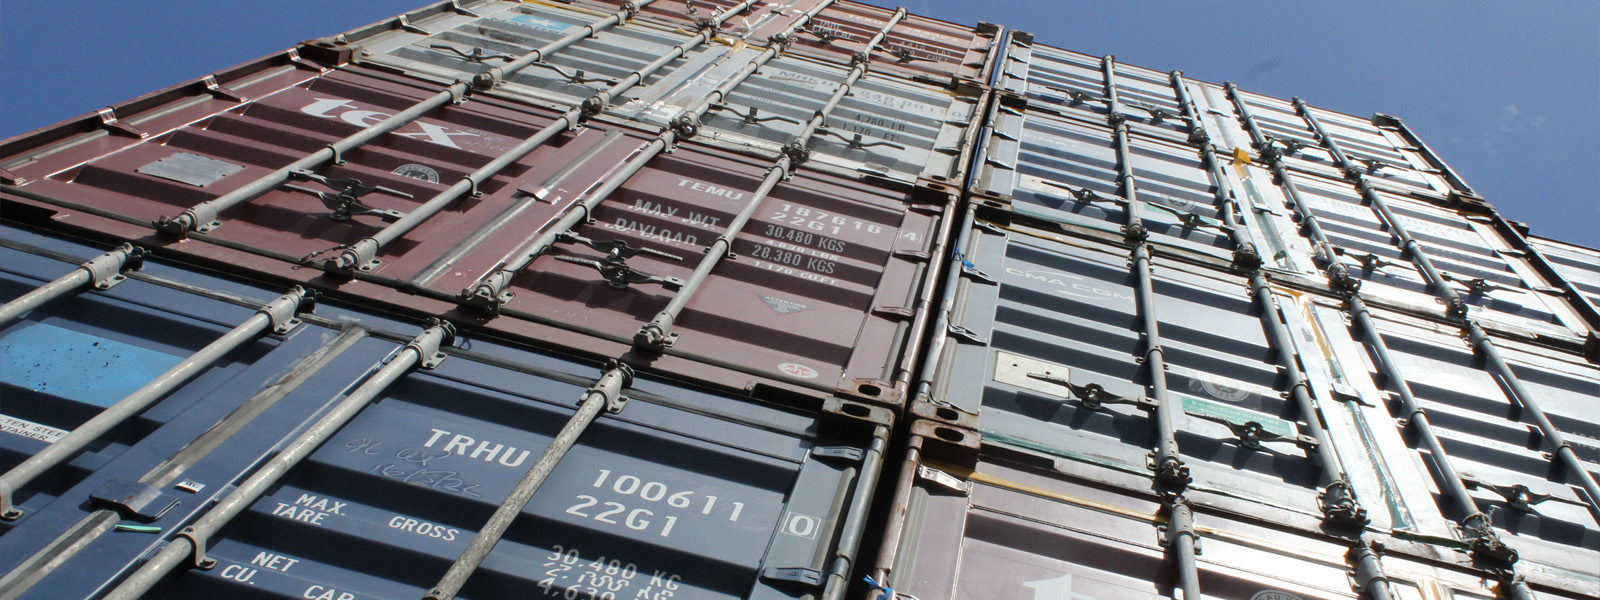 Express Freight Management Containers